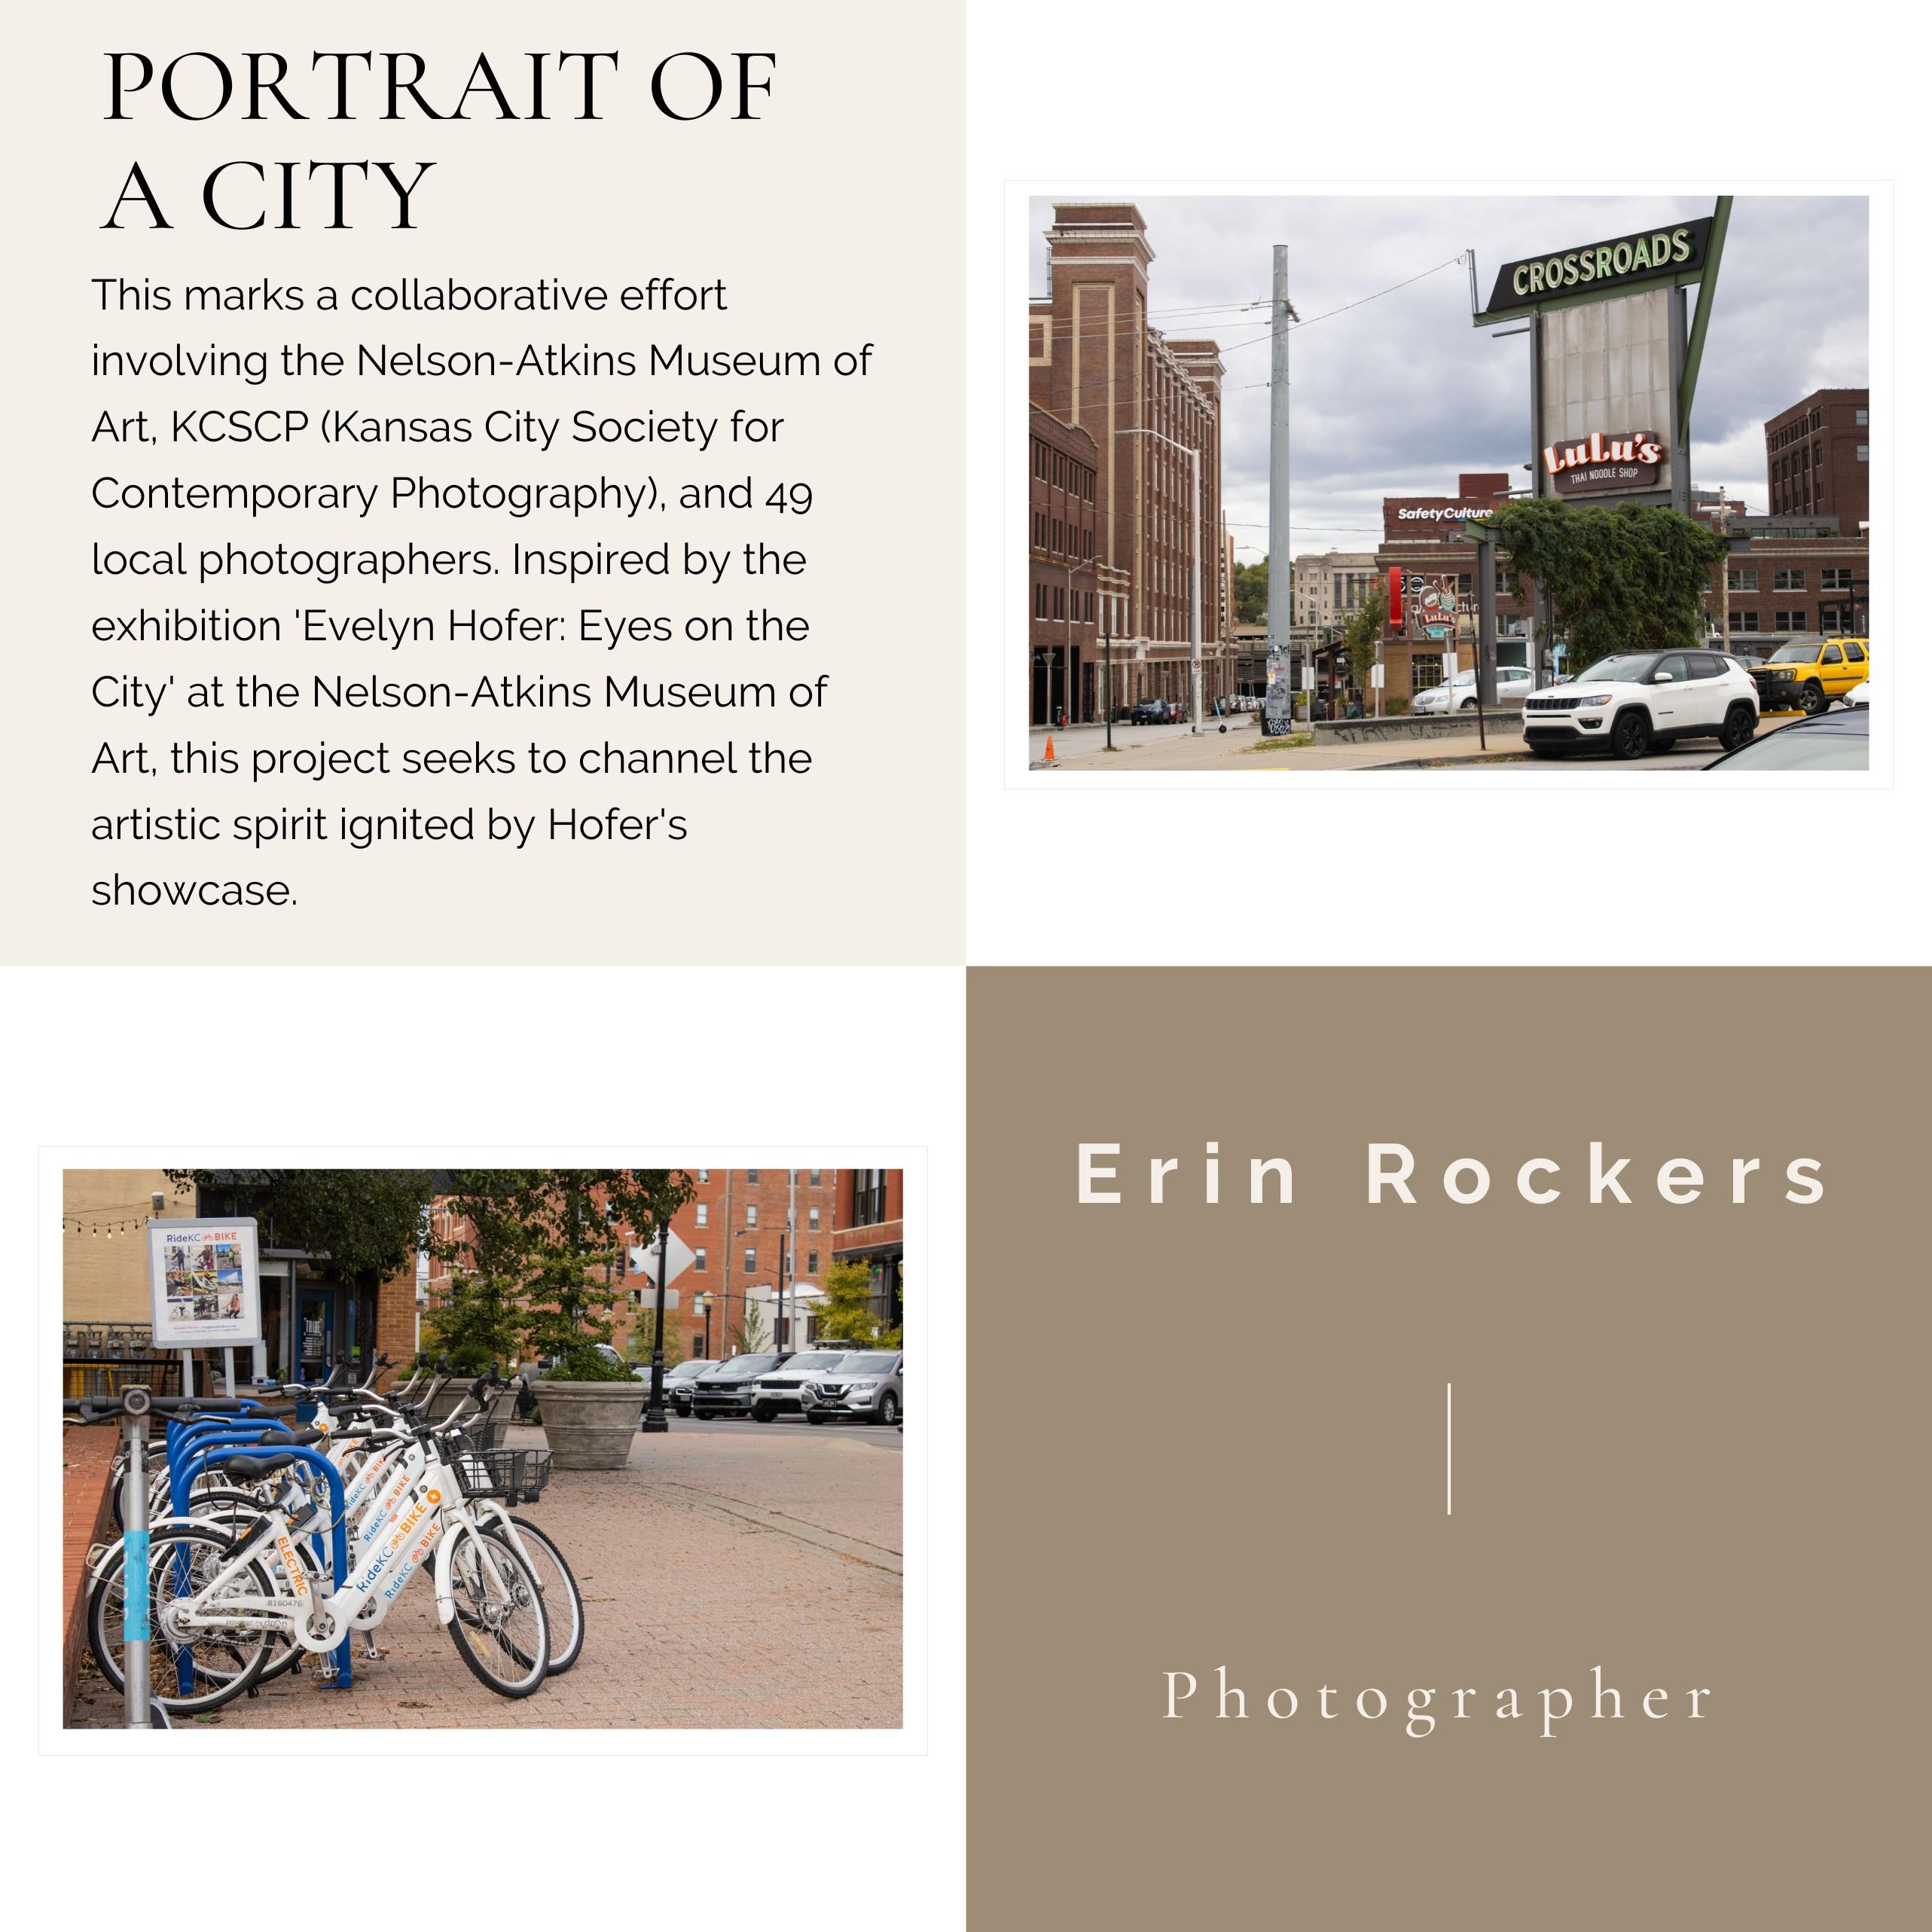 Erin Rockers
City Market
Year: 2024
Archival Pigment Print on
Hahnemuehle Baryta Rag
Framed Size: 13 x 13 x 0.25 inches
COA provided

*Ready to hang; matted and framed in a minimal black frame made from composite wood with standard plex

From